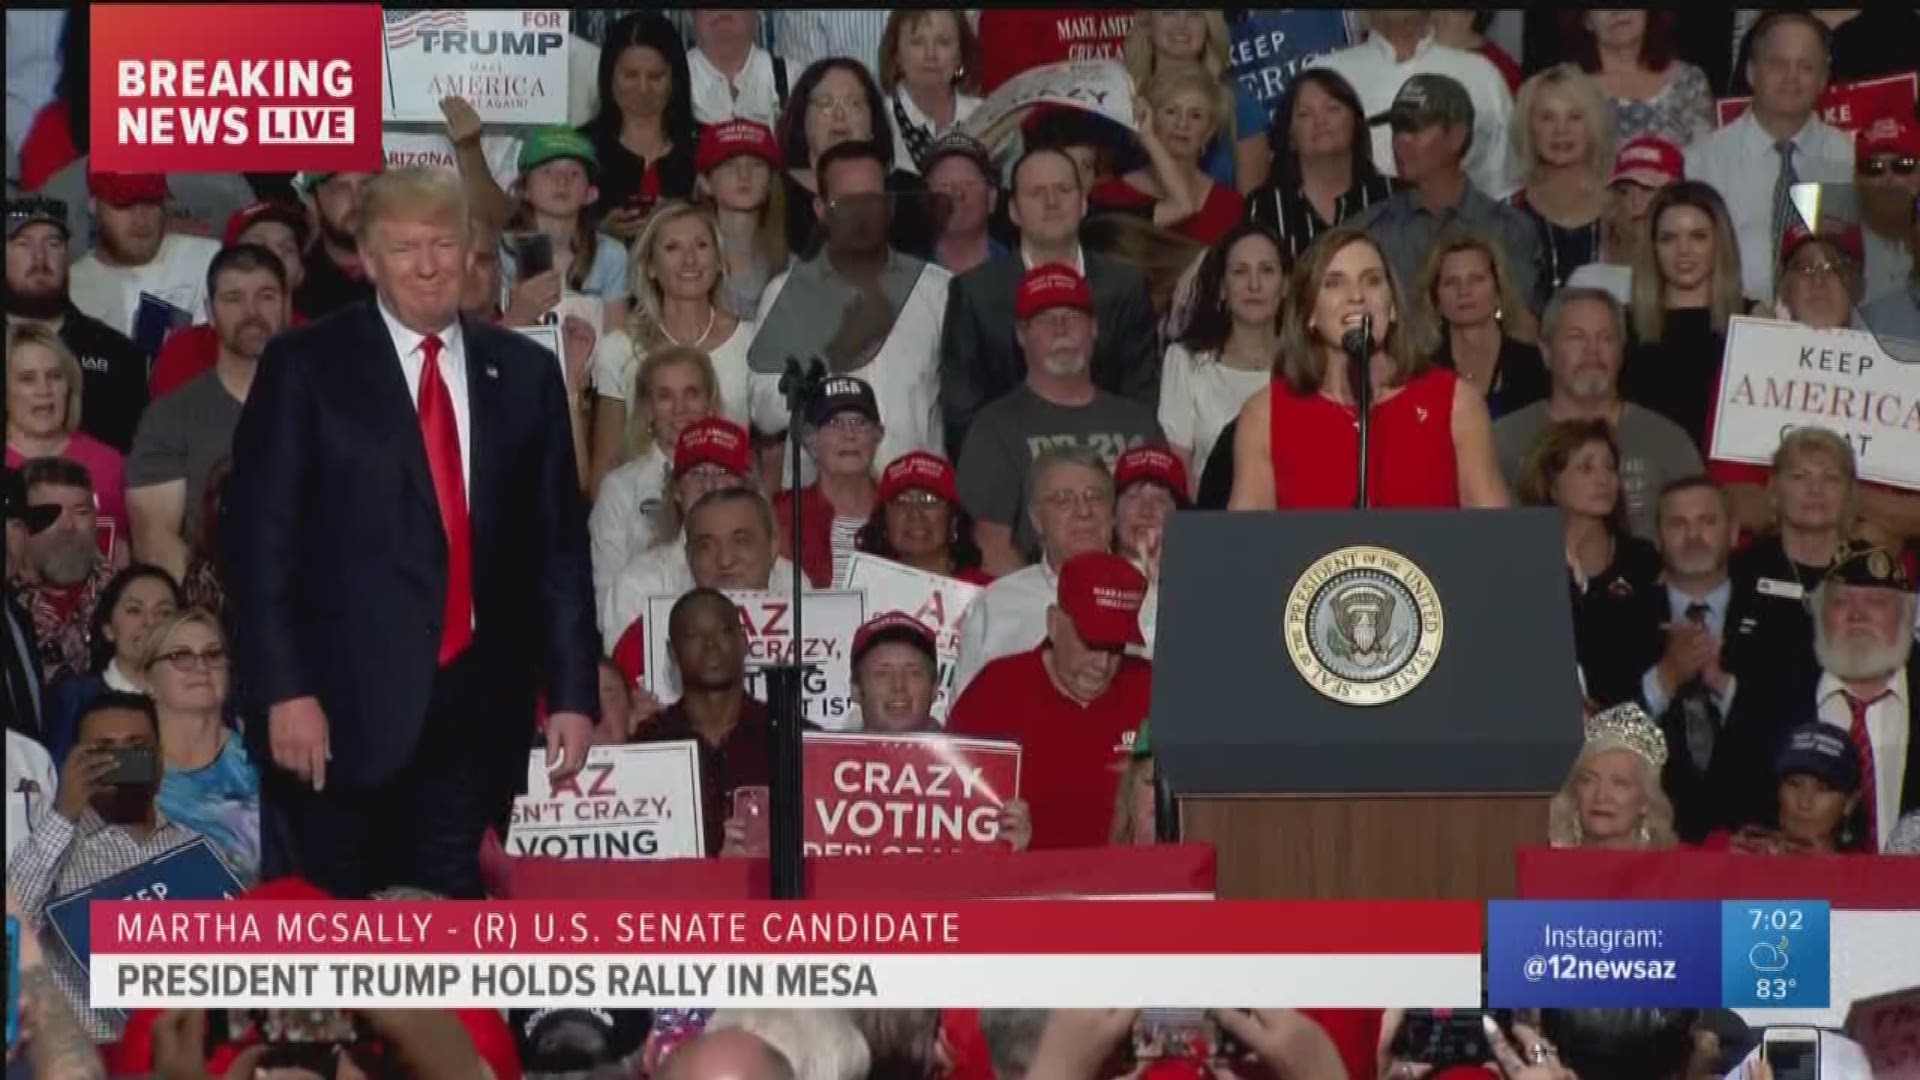 Senate candidate Martha McSally has invited President Trump to speak at a rally in Mesa ahead of the mid-term election. Watch as Martha McSally campaigns for a seat in the U.S. Senate.